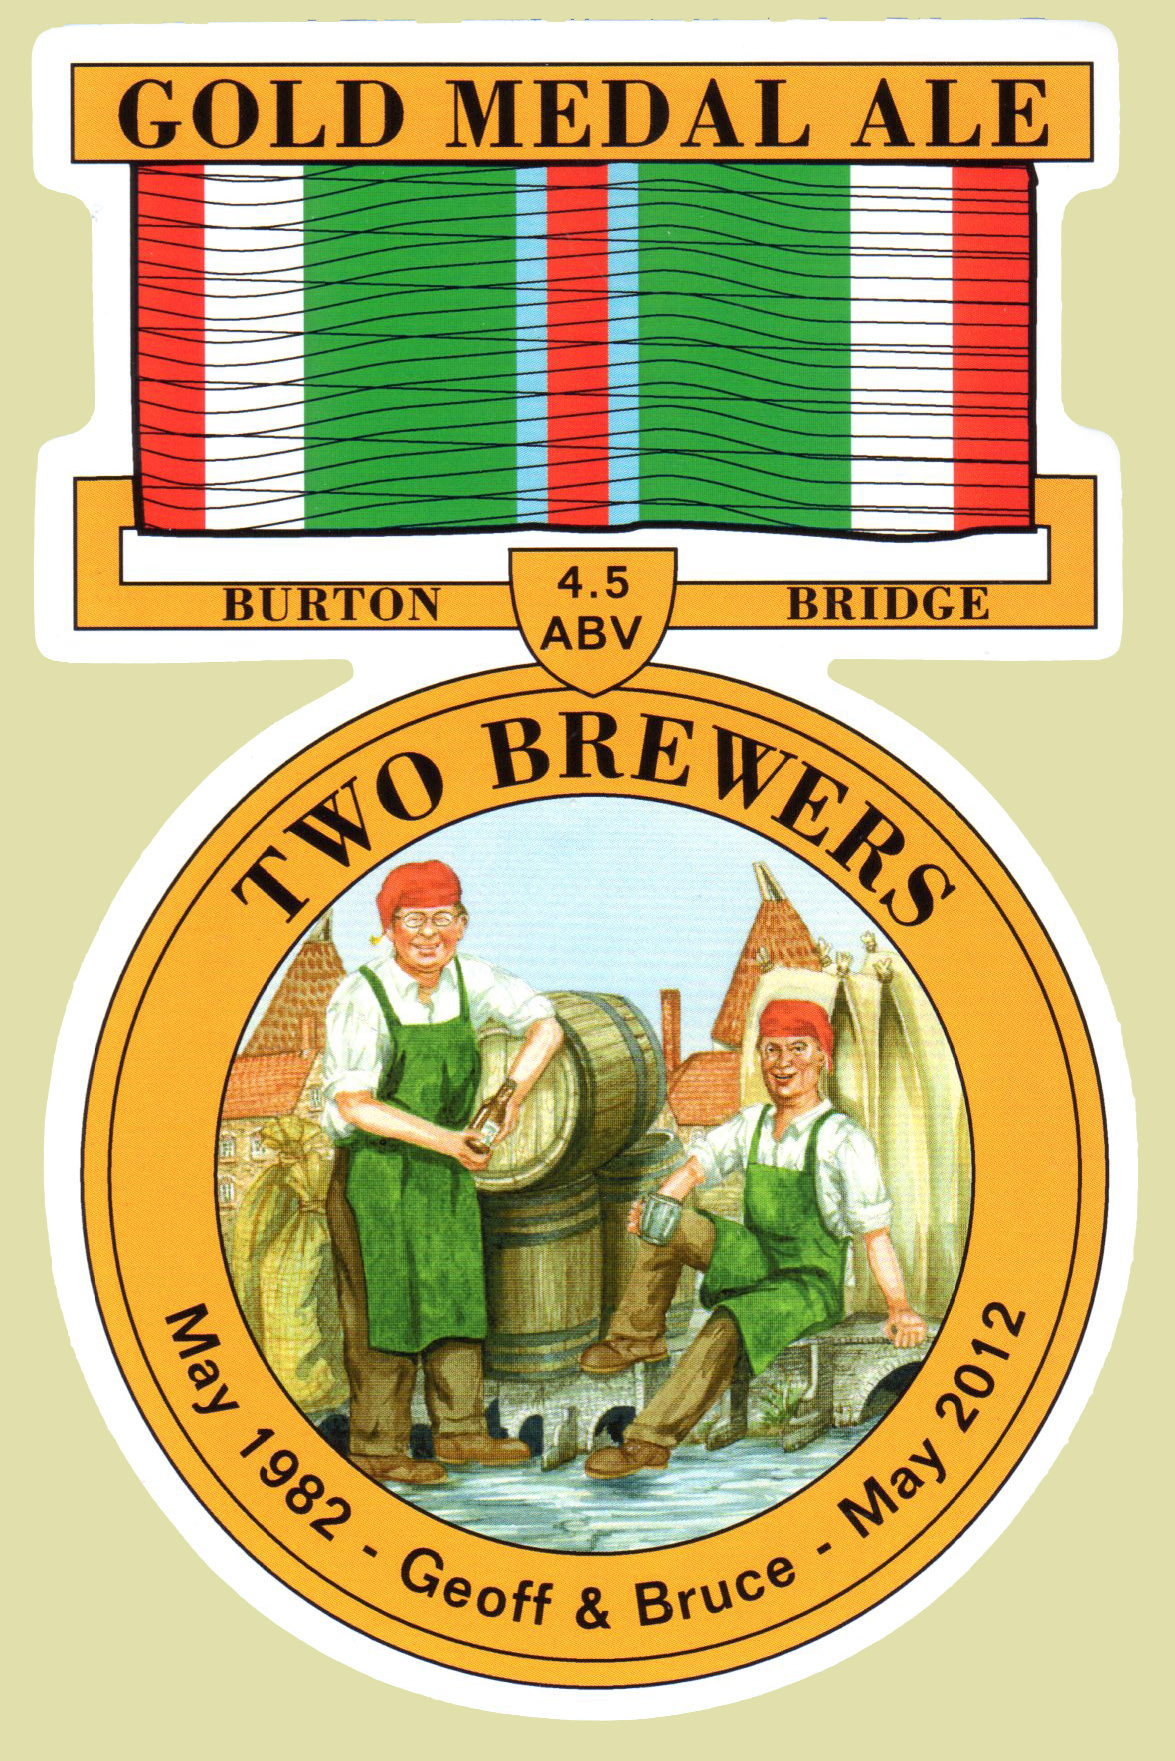 Two Brewers